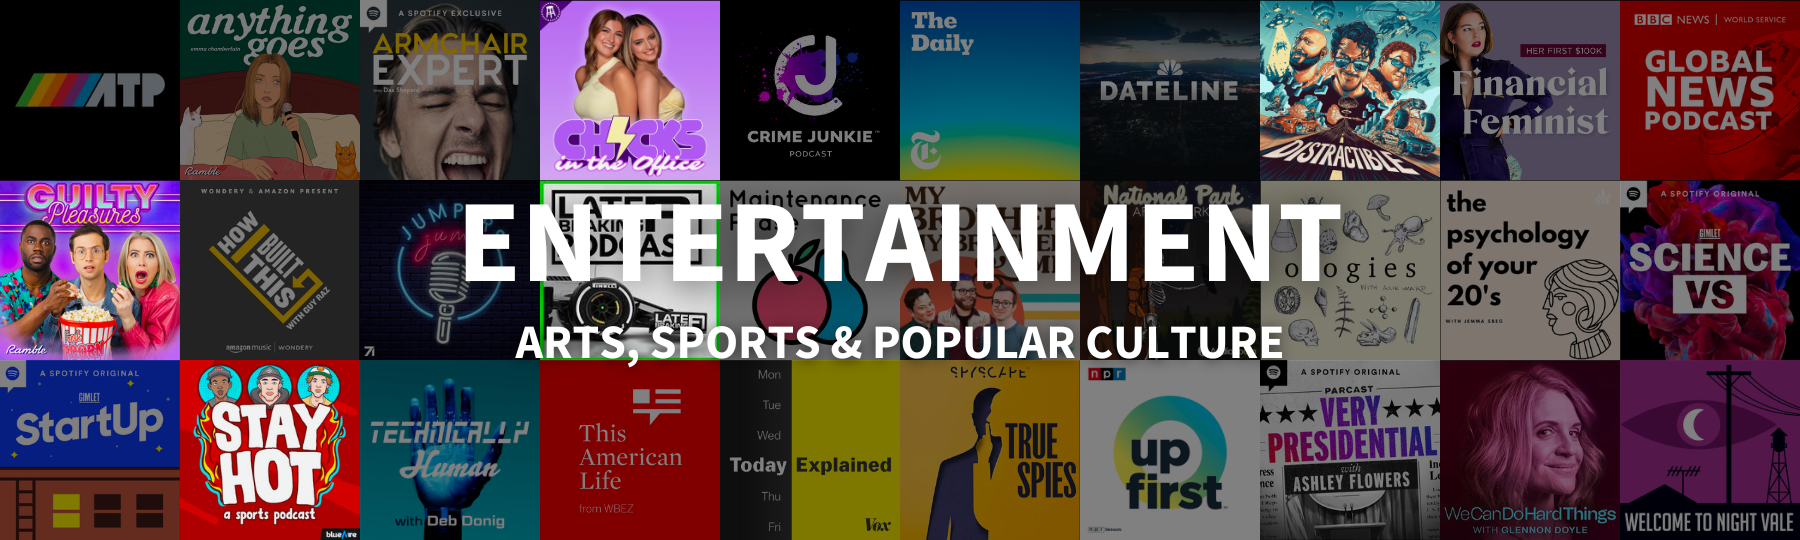 A graphic that says "Entertainment: Arts, Sports & Popular Culture" with a collage of podcast covers in the back.